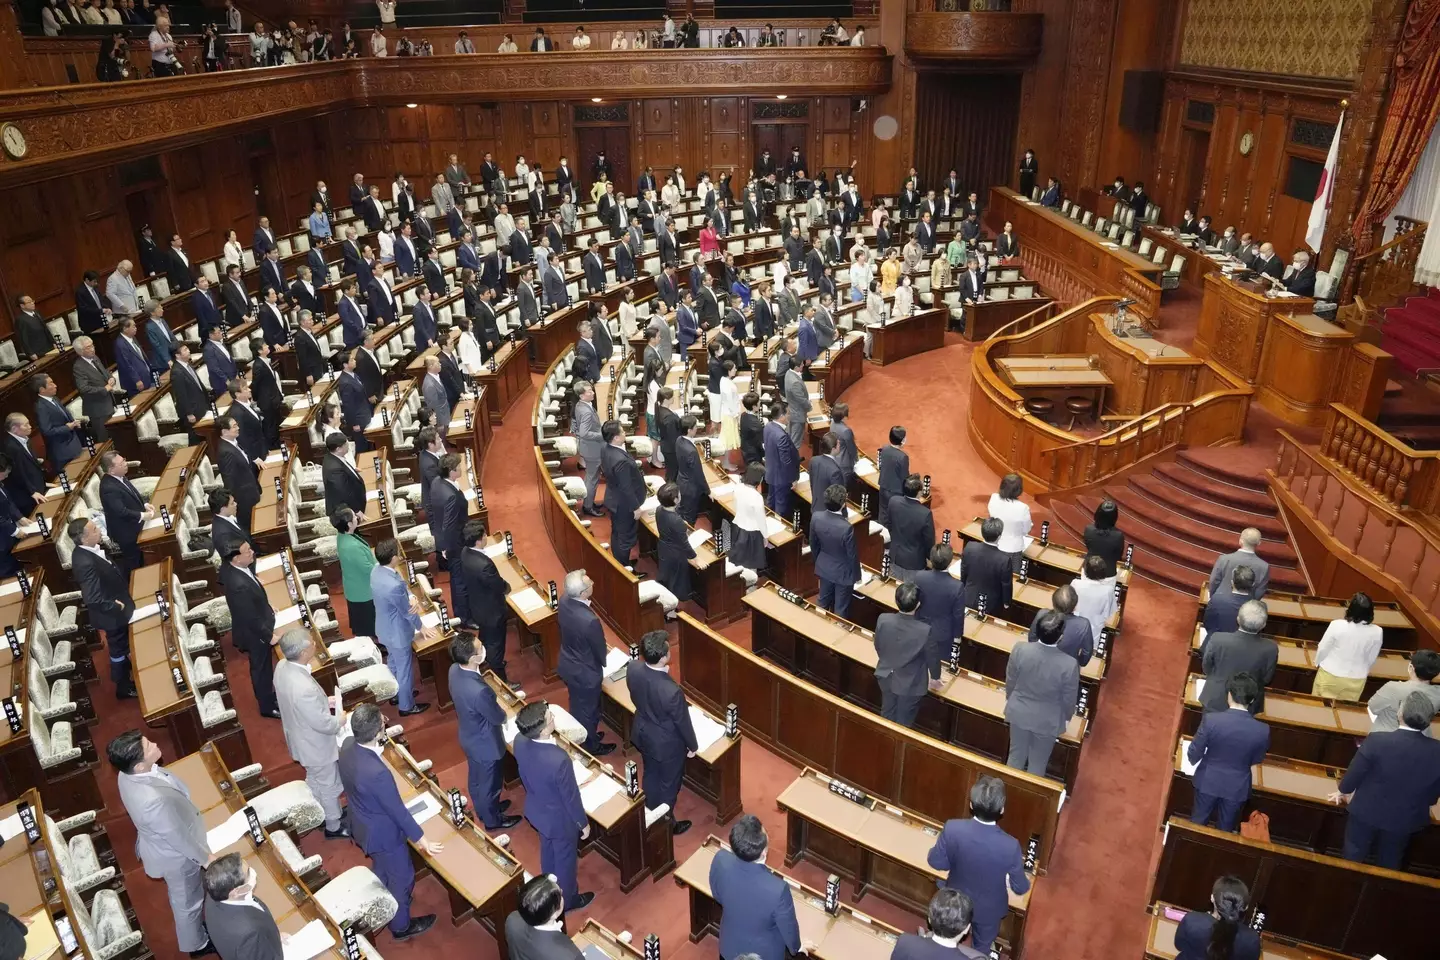 The Japanese parliament voting to raise the age of consent.